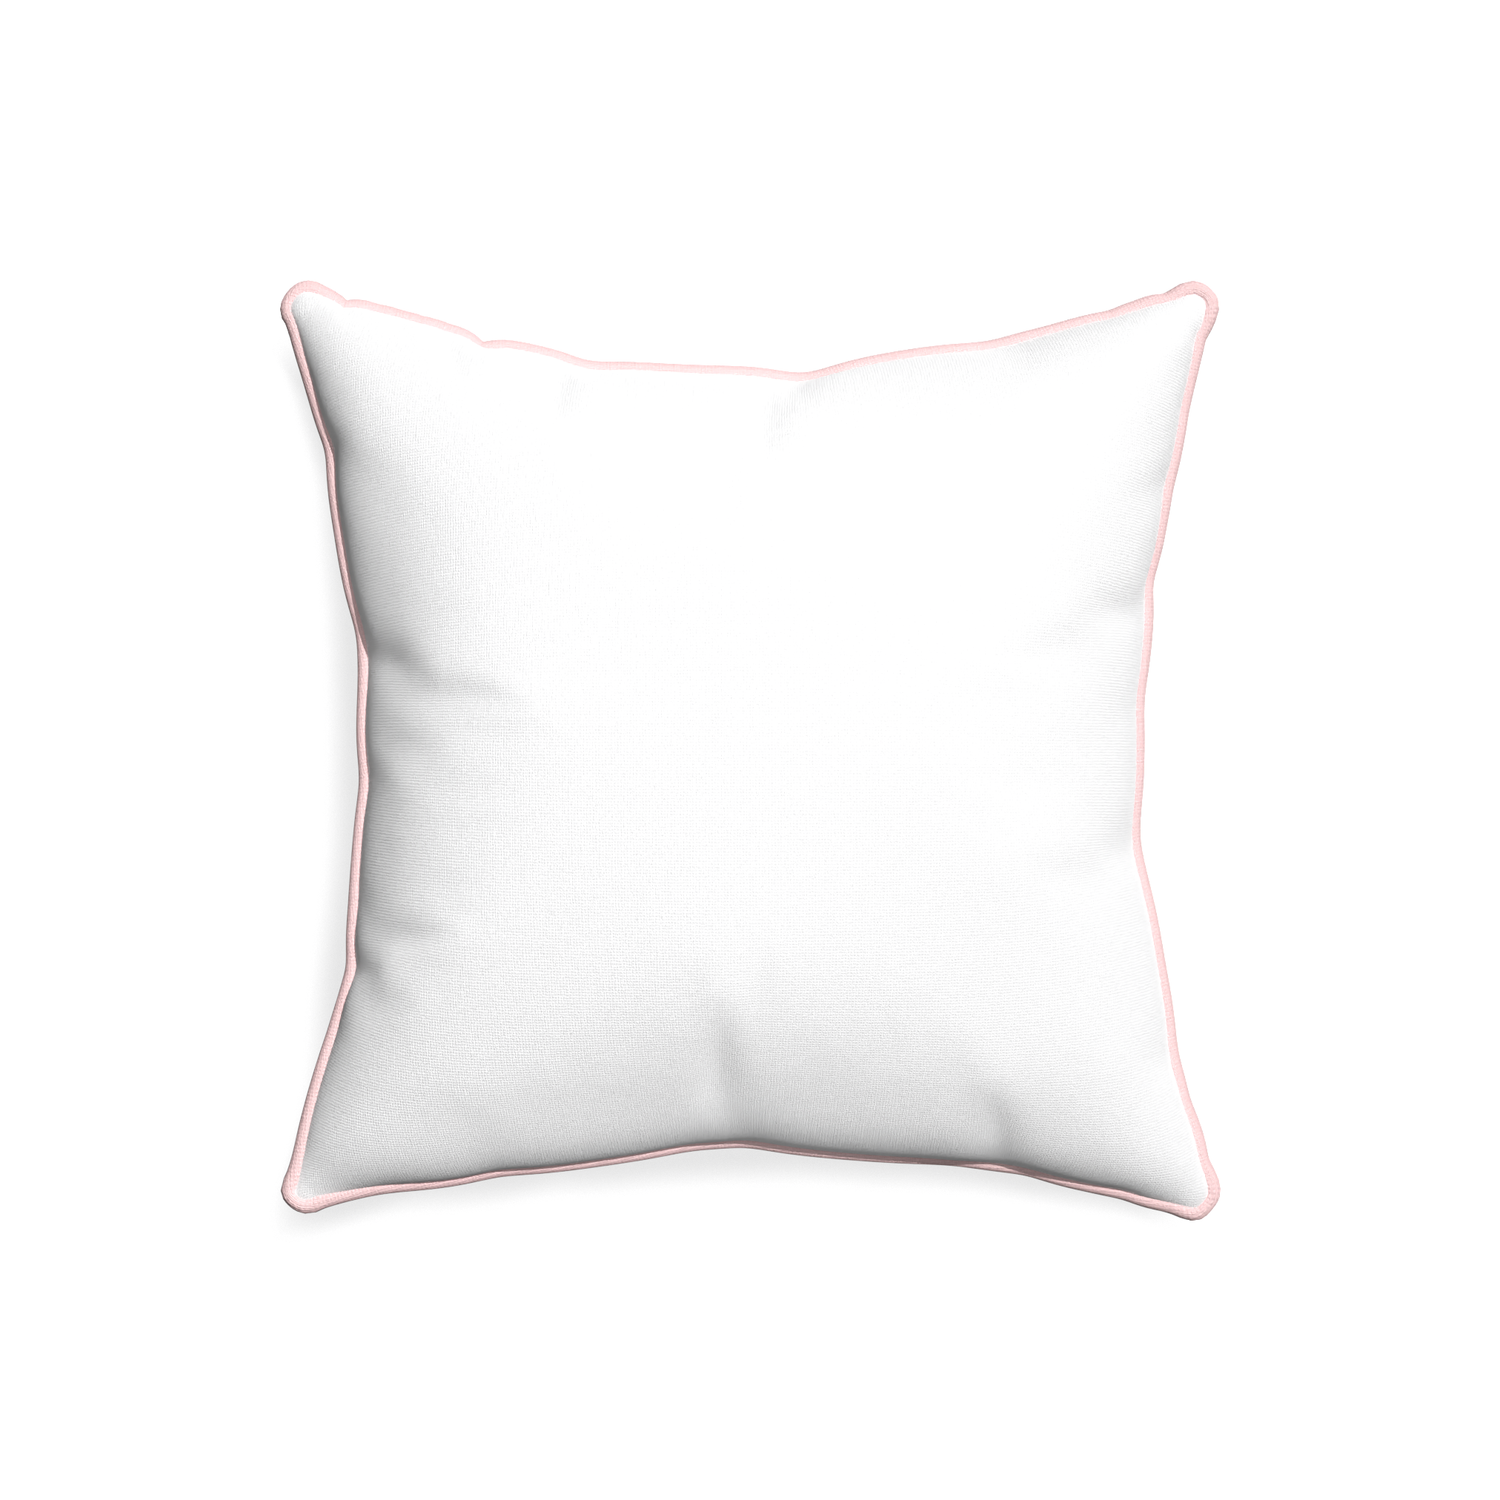 20-square snow custom white cottonpillow with petal piping on white background